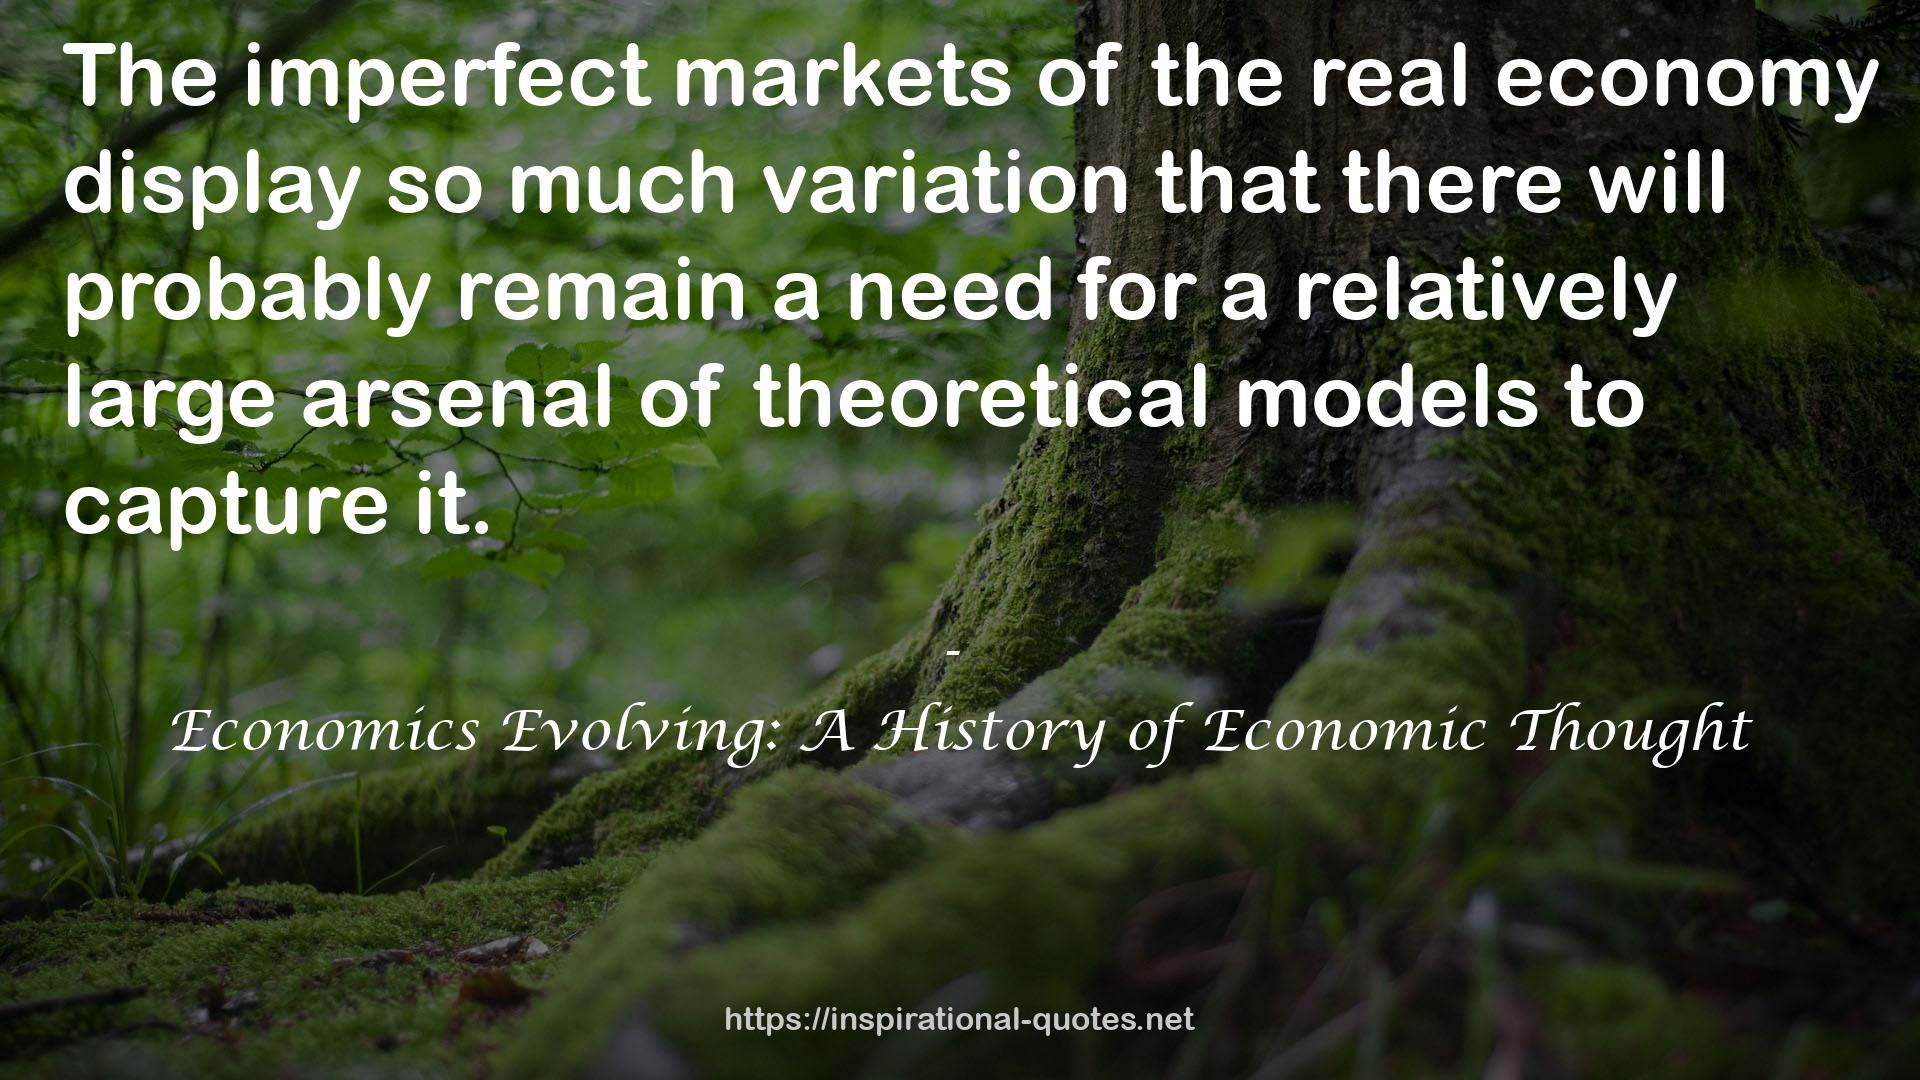 Economics Evolving: A History of Economic Thought QUOTES